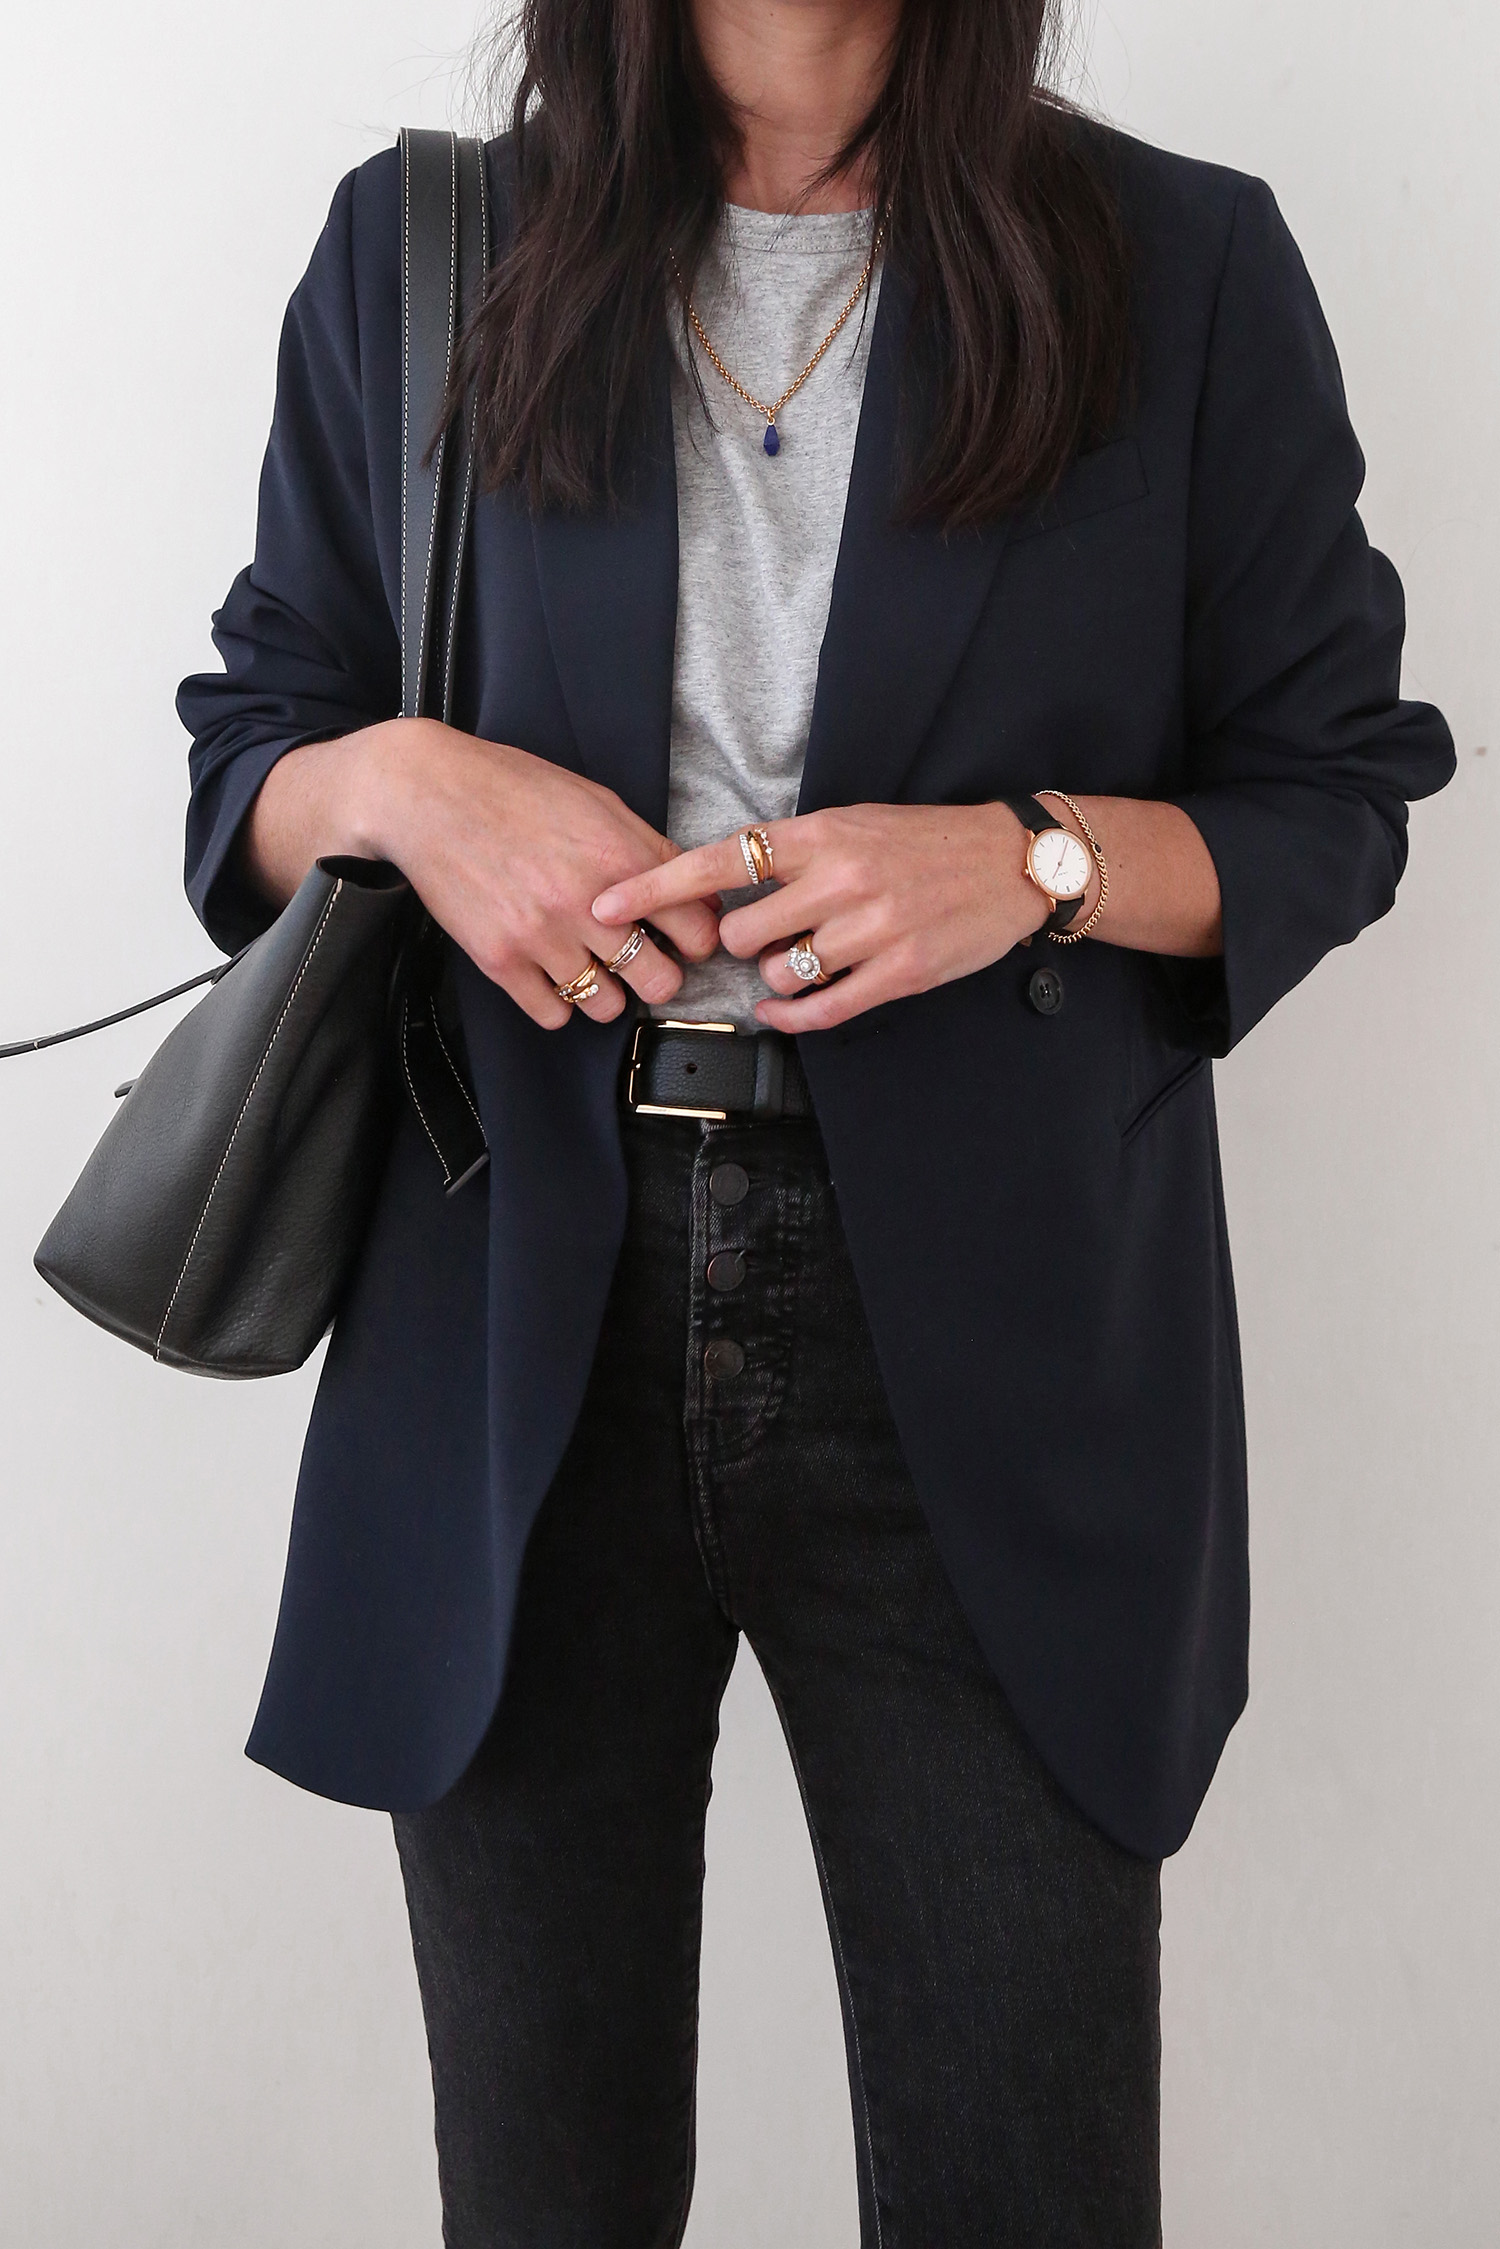 Scandi chic style wearing grey tee with navy blazer and skinny jeans